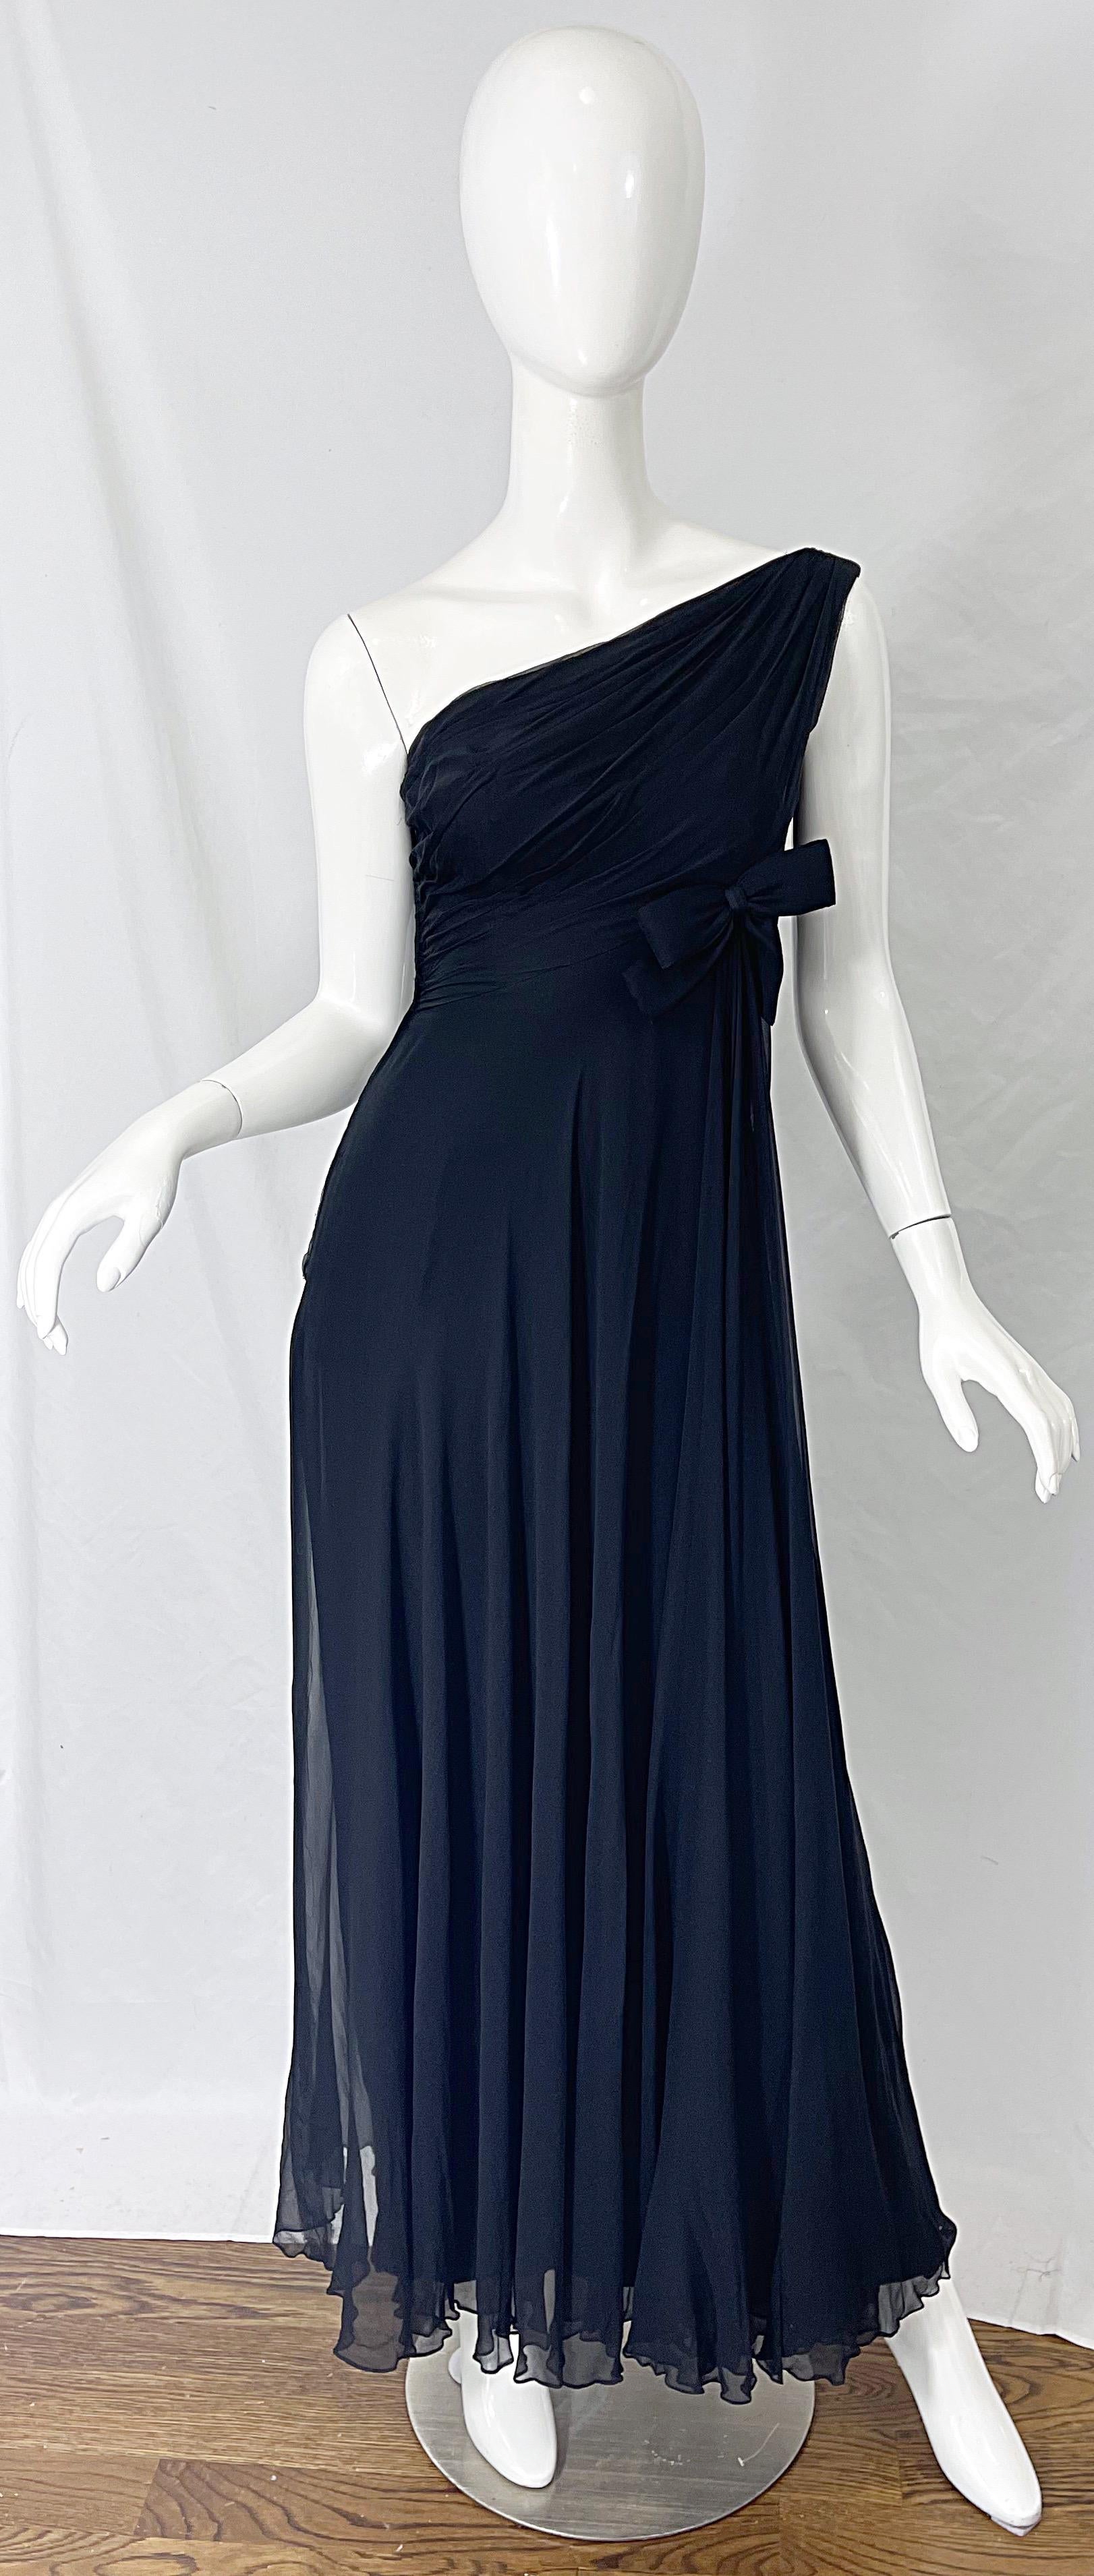 Beautiful 1960s MALCOLM STARR black silk chiffon Grecian inspired one shoulder evening dress / gown! Features a tailored bodice with an attached bow above the asymmetric waist line. Layers of long flowy chiffon on the skirt. Hidden metal zipper up